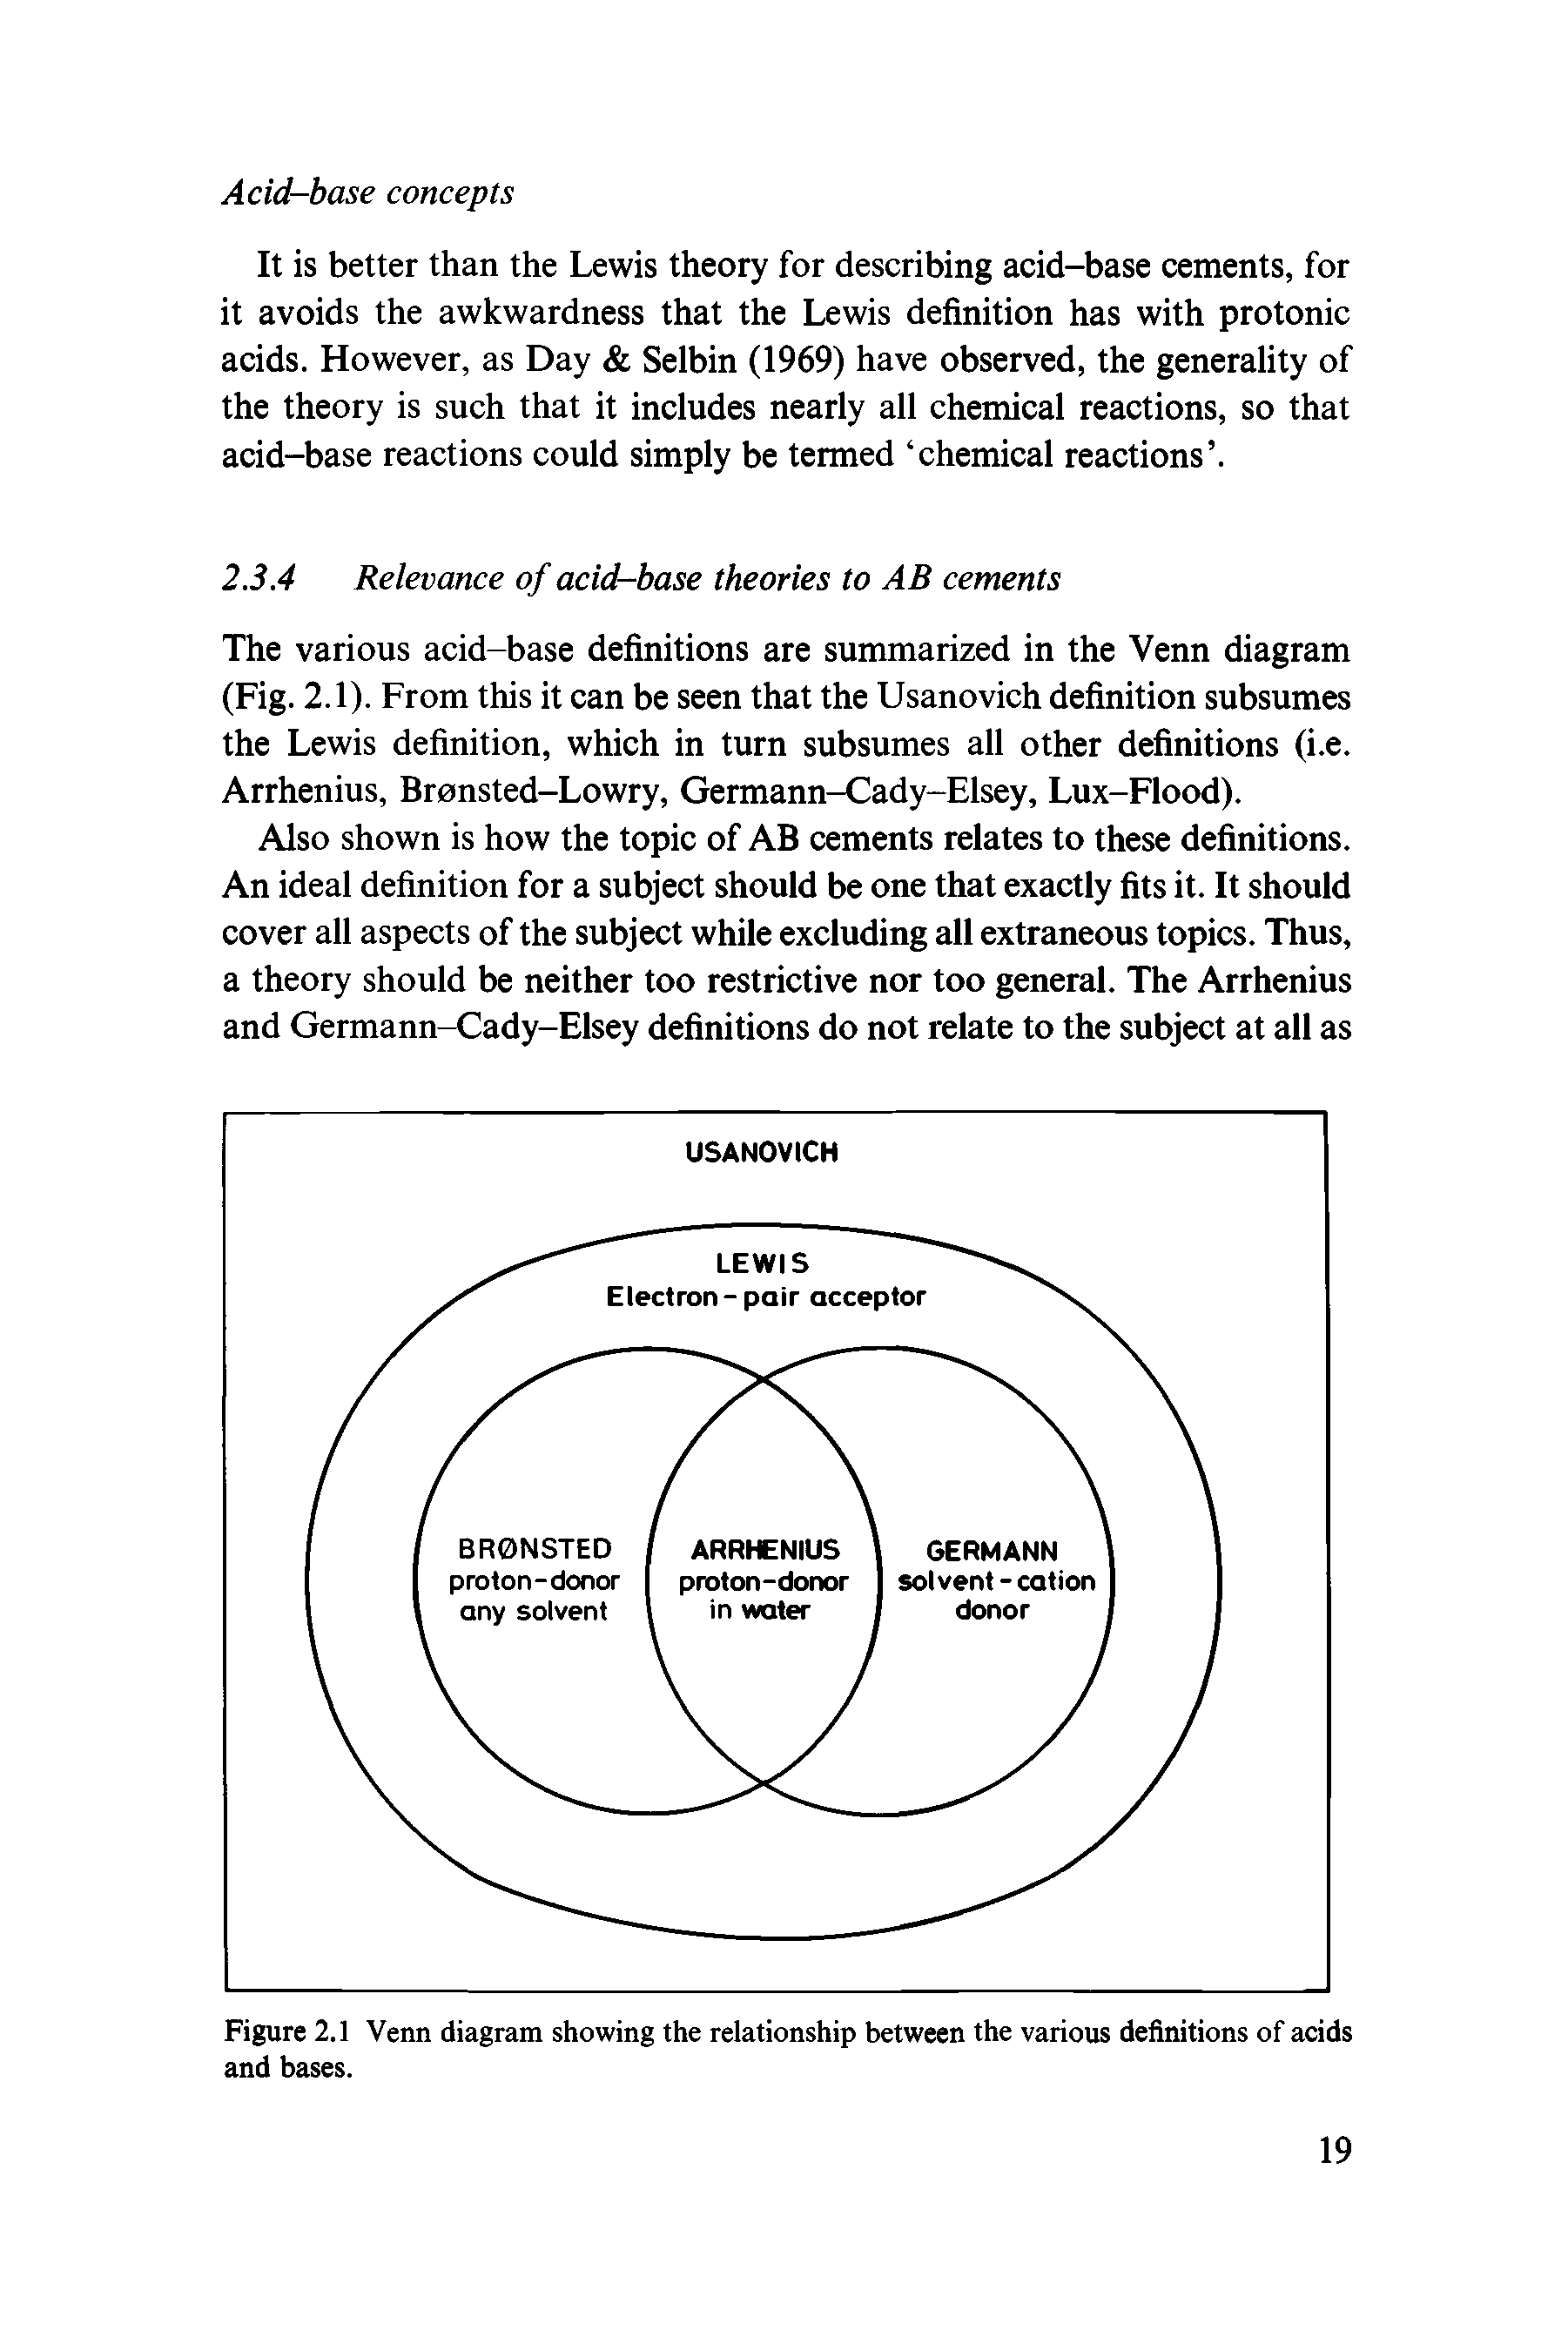 Figure 2.1 Venn diagram showing the relationship between the various definitions of acids and bases.